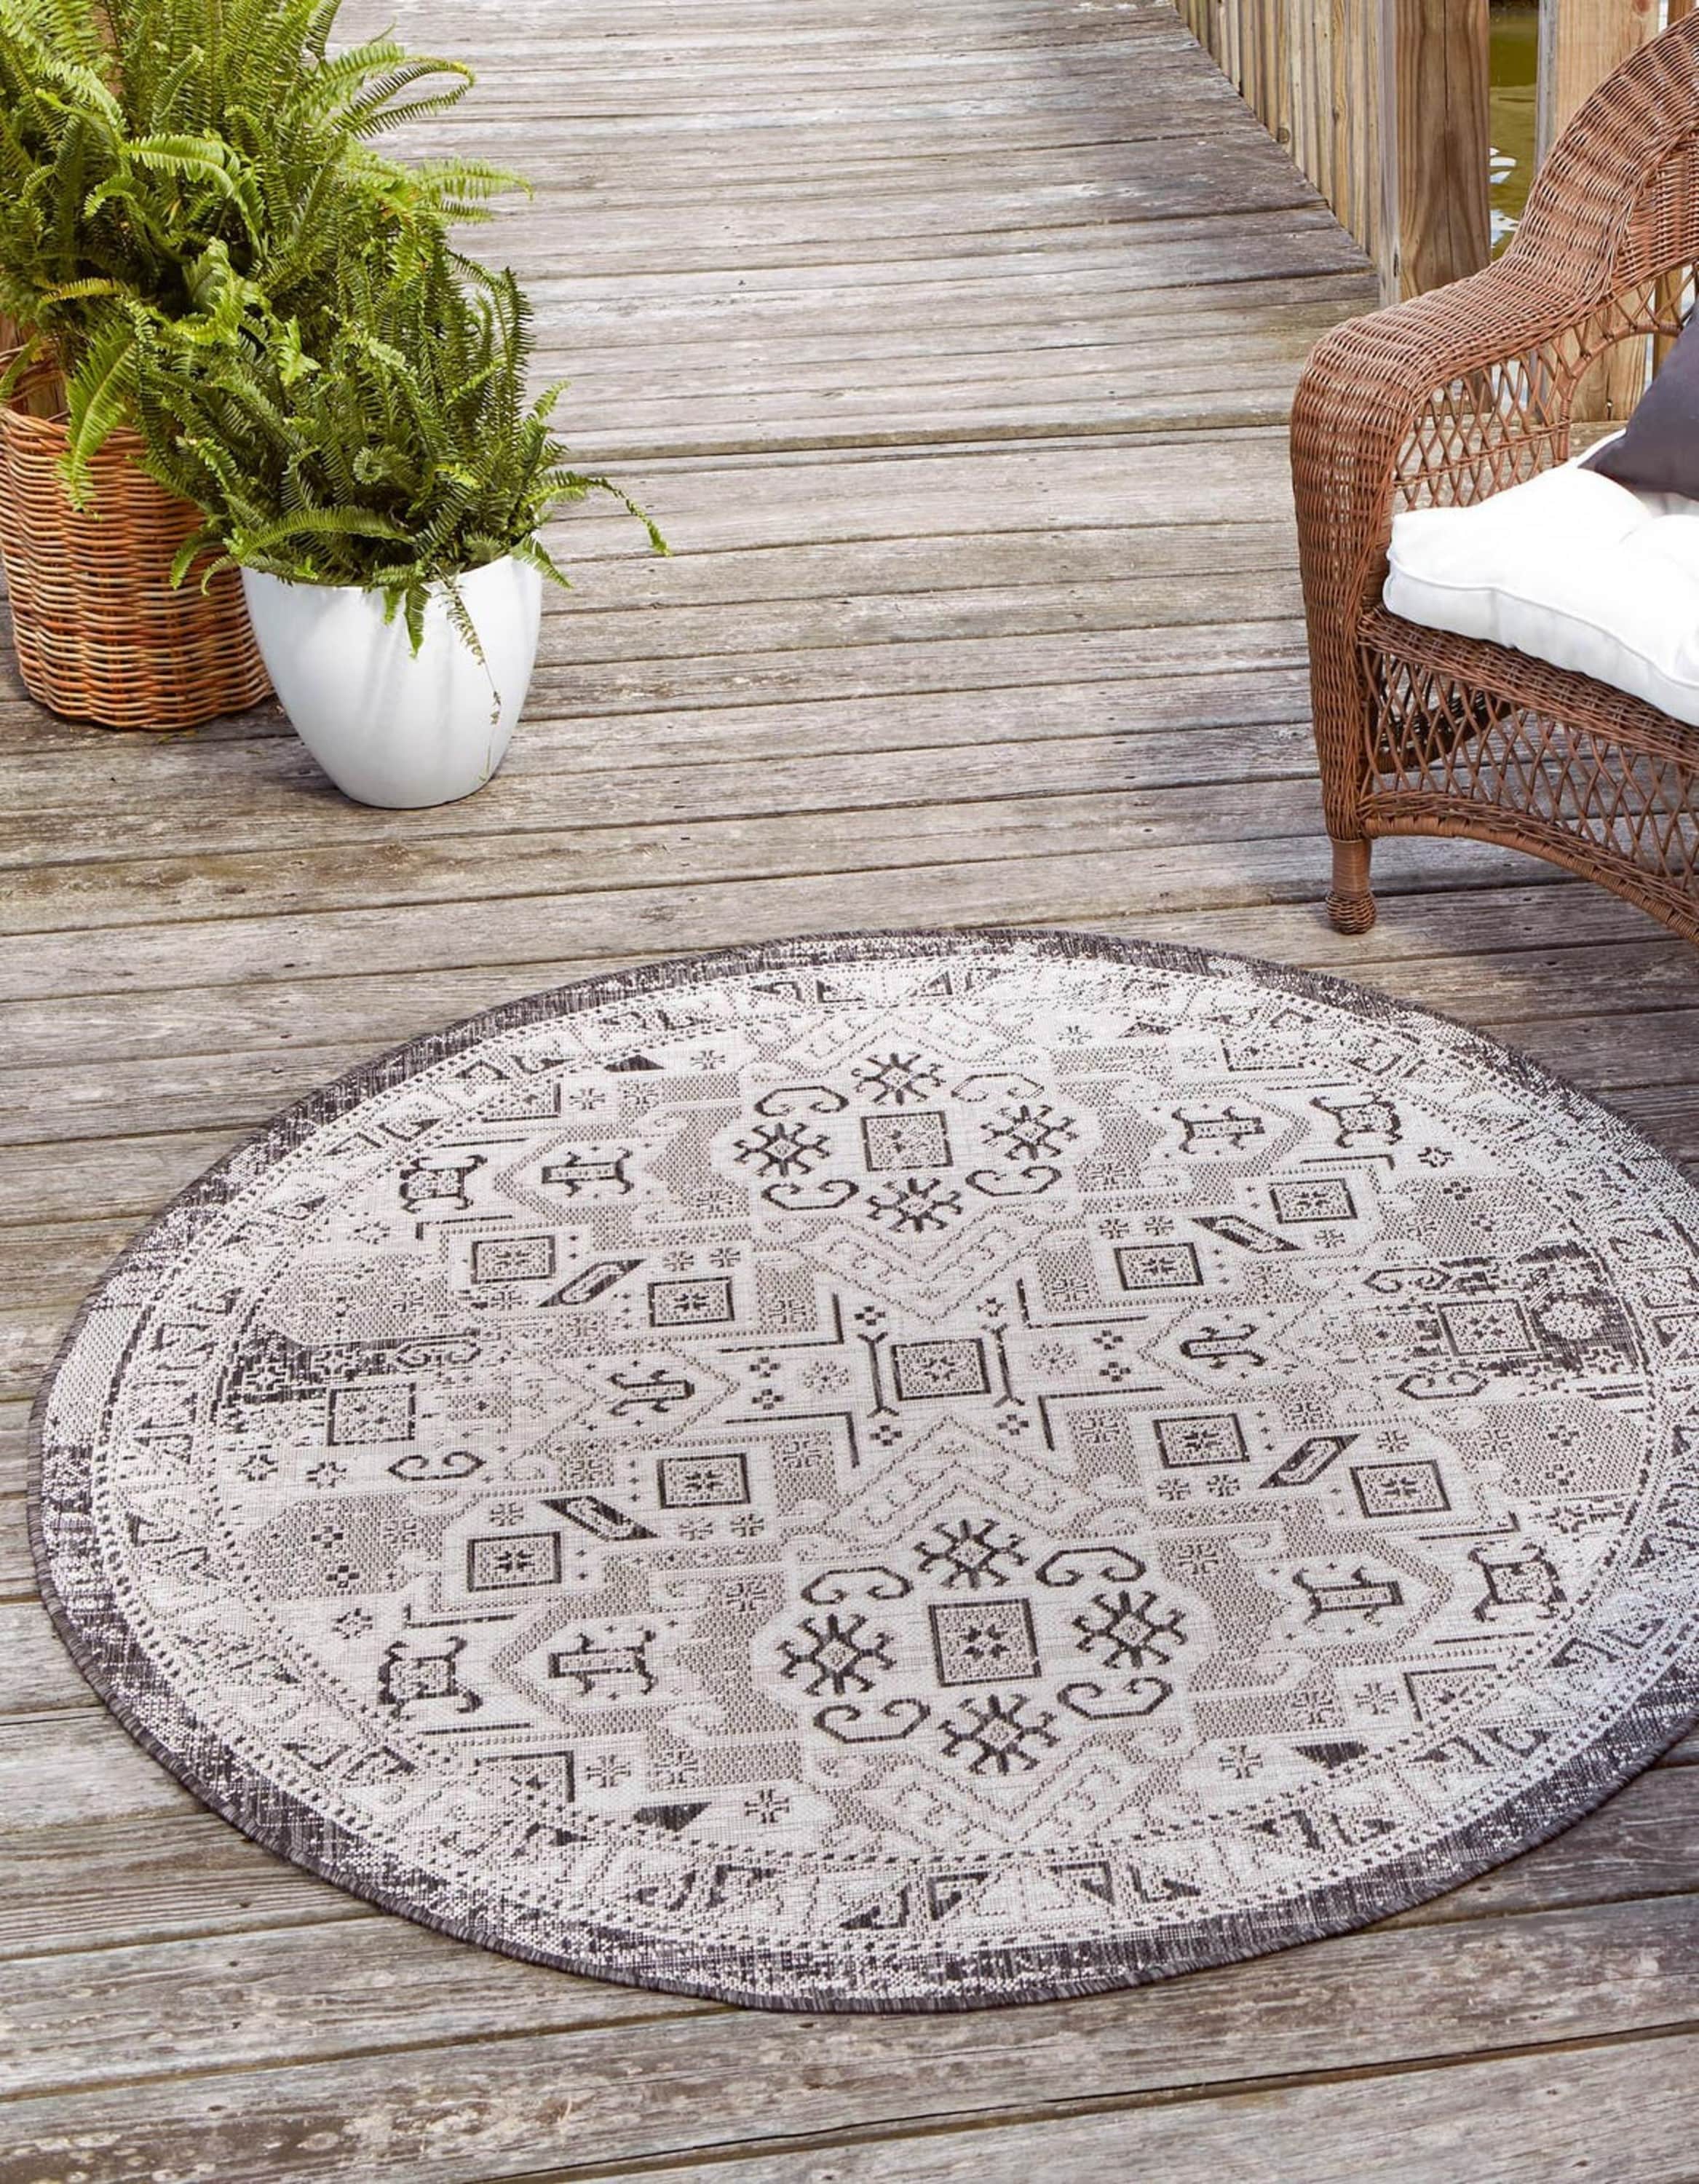 Unique Loom Outdoor Aztec 3 X in the at department Rugs Rug Charcoal 3 Gray Indoor/Outdoor Area Border Round